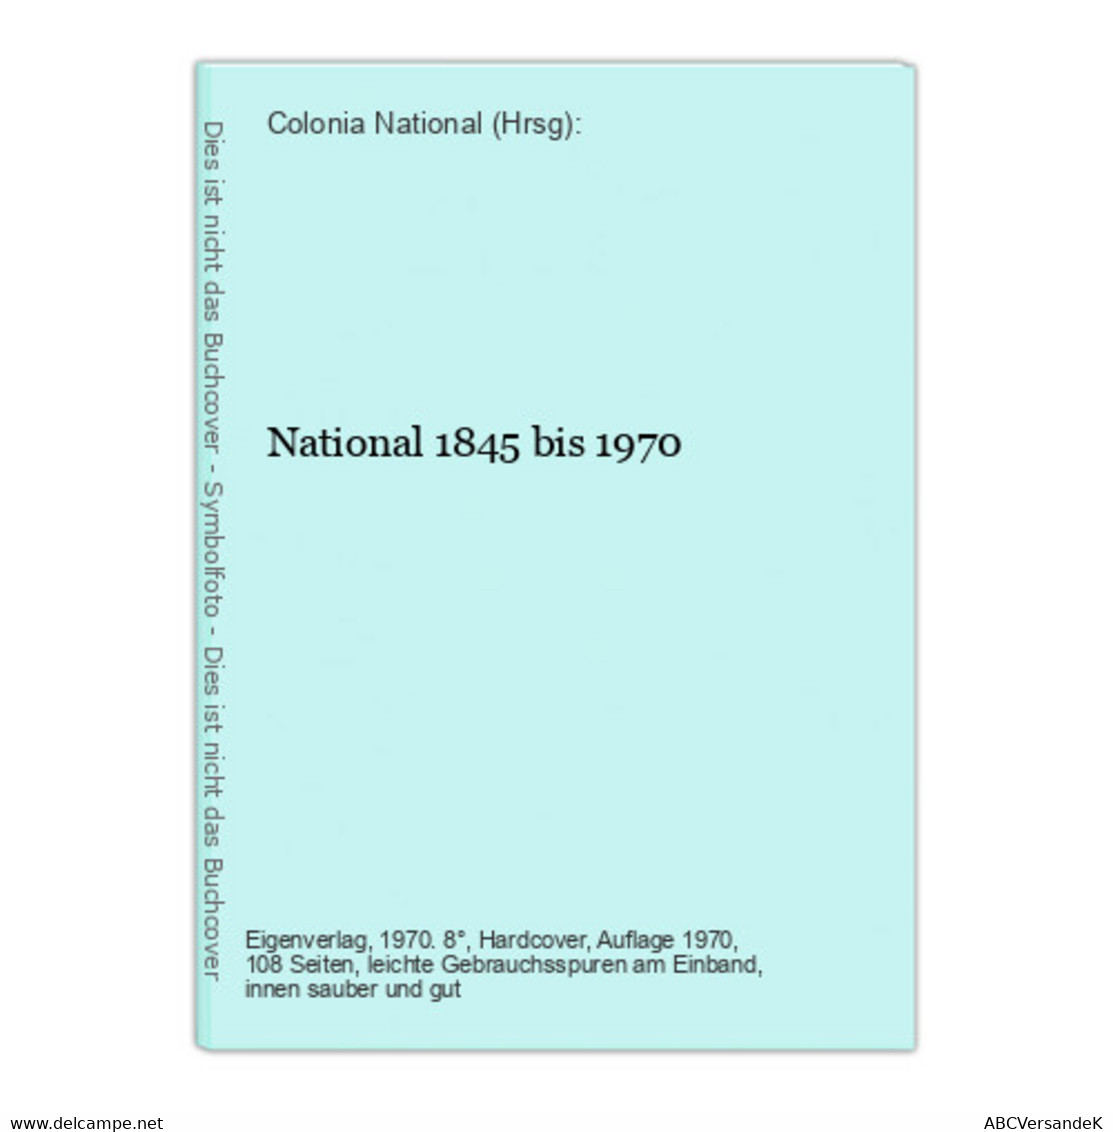 National 1845 Bis 1970 - Law